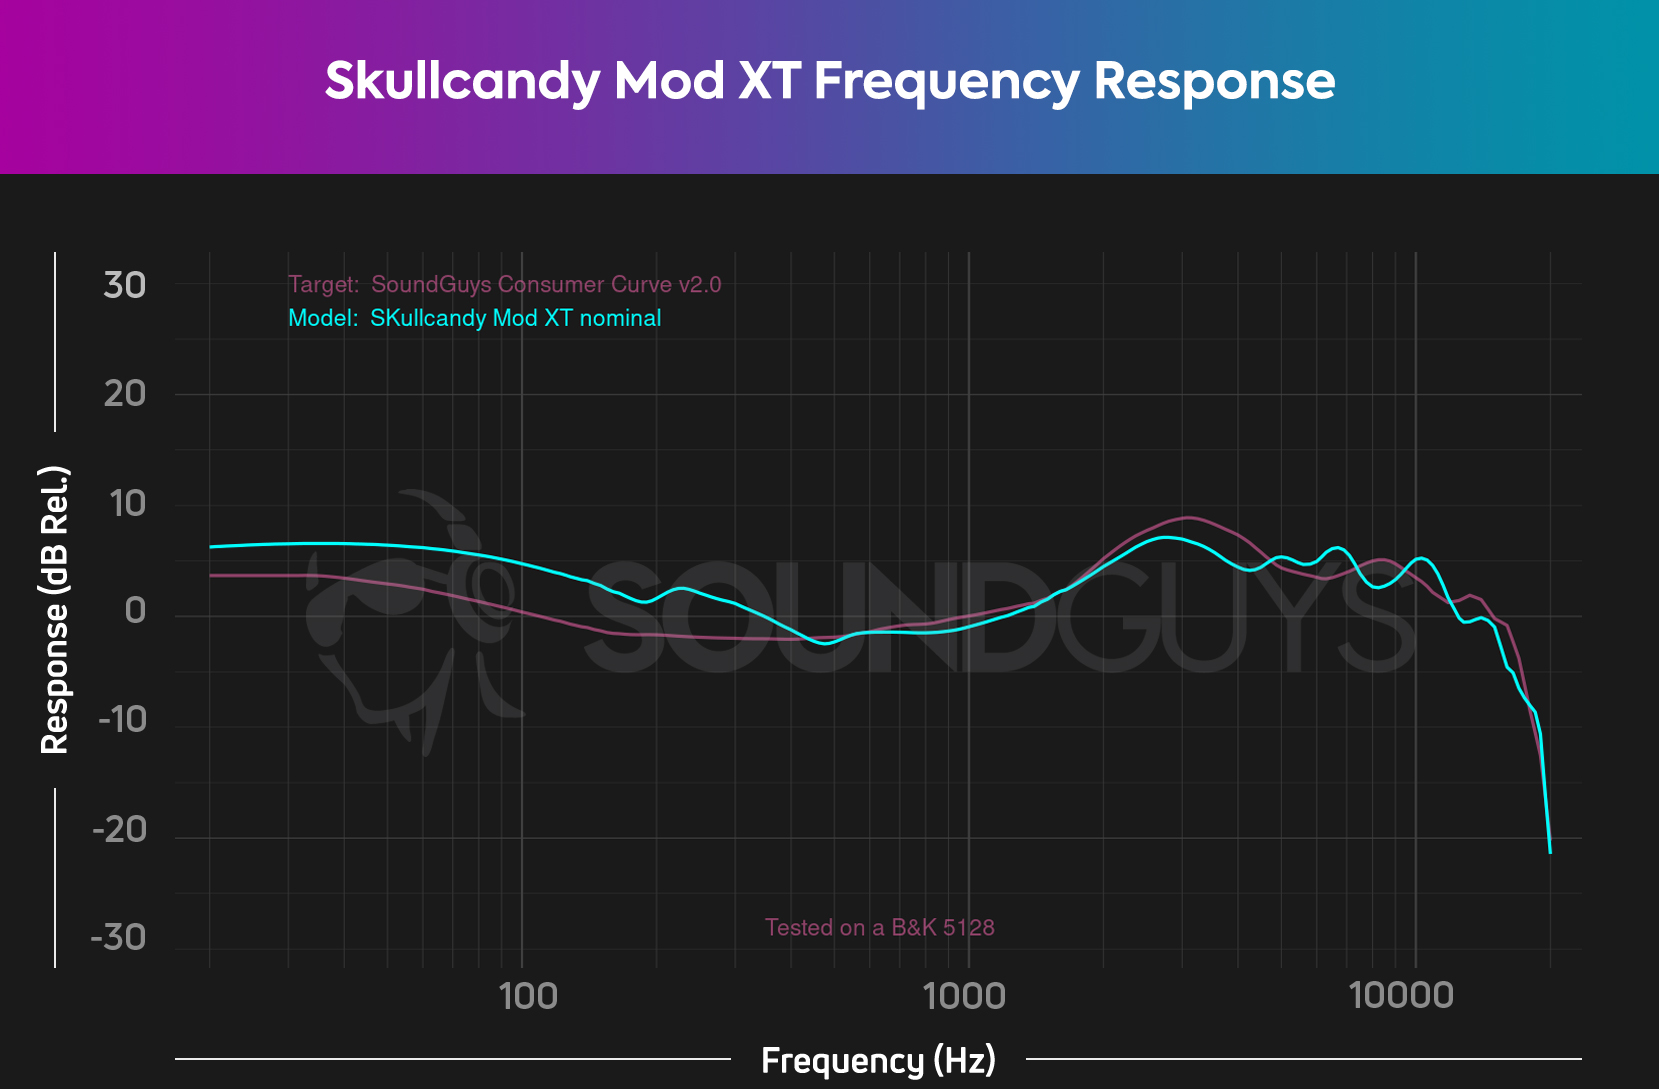 The frequency response chart for the Skullcandy Mod XT.